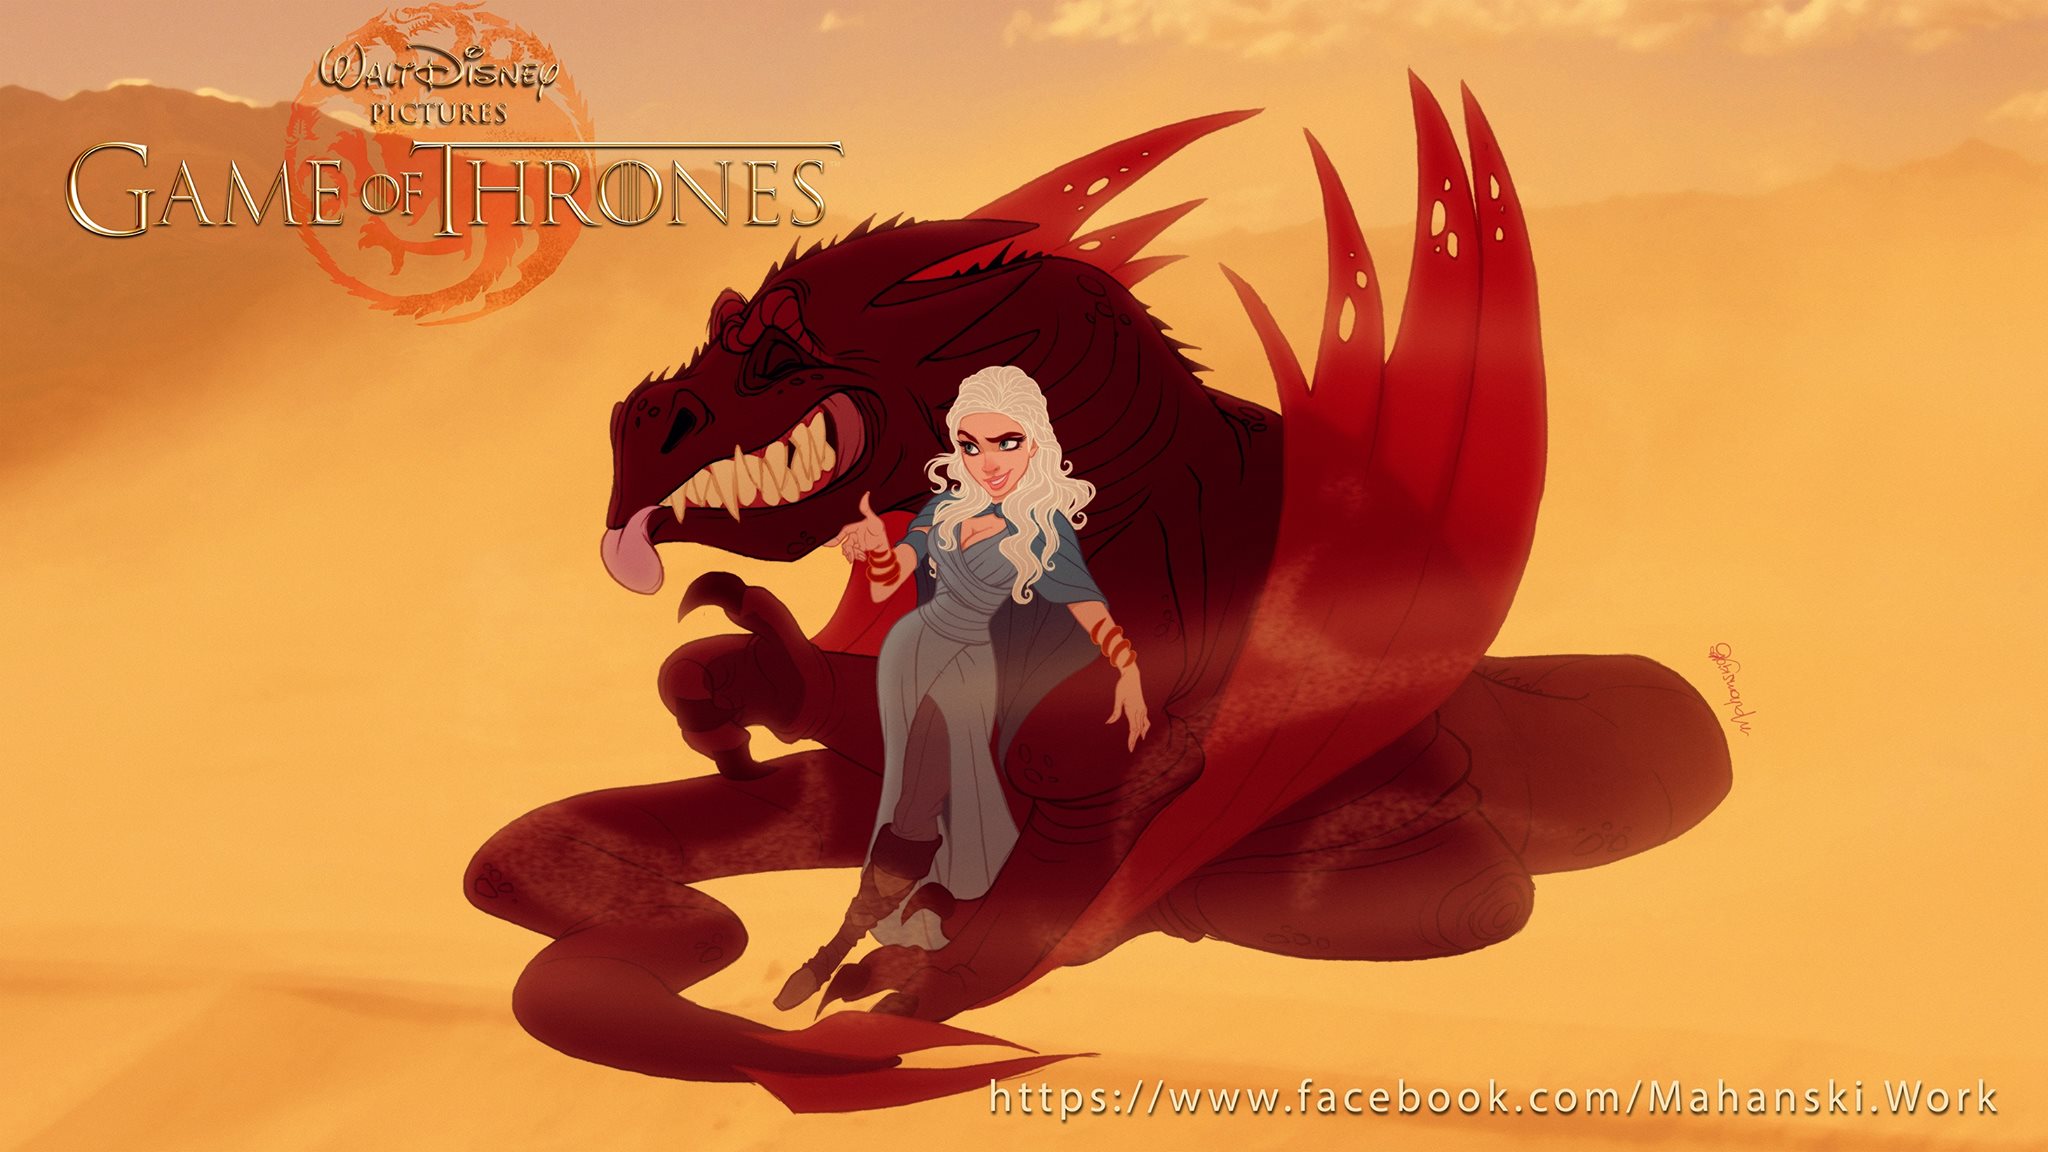 This Is What Game Of Thrones Would Look Like If It Were A Disney Movie